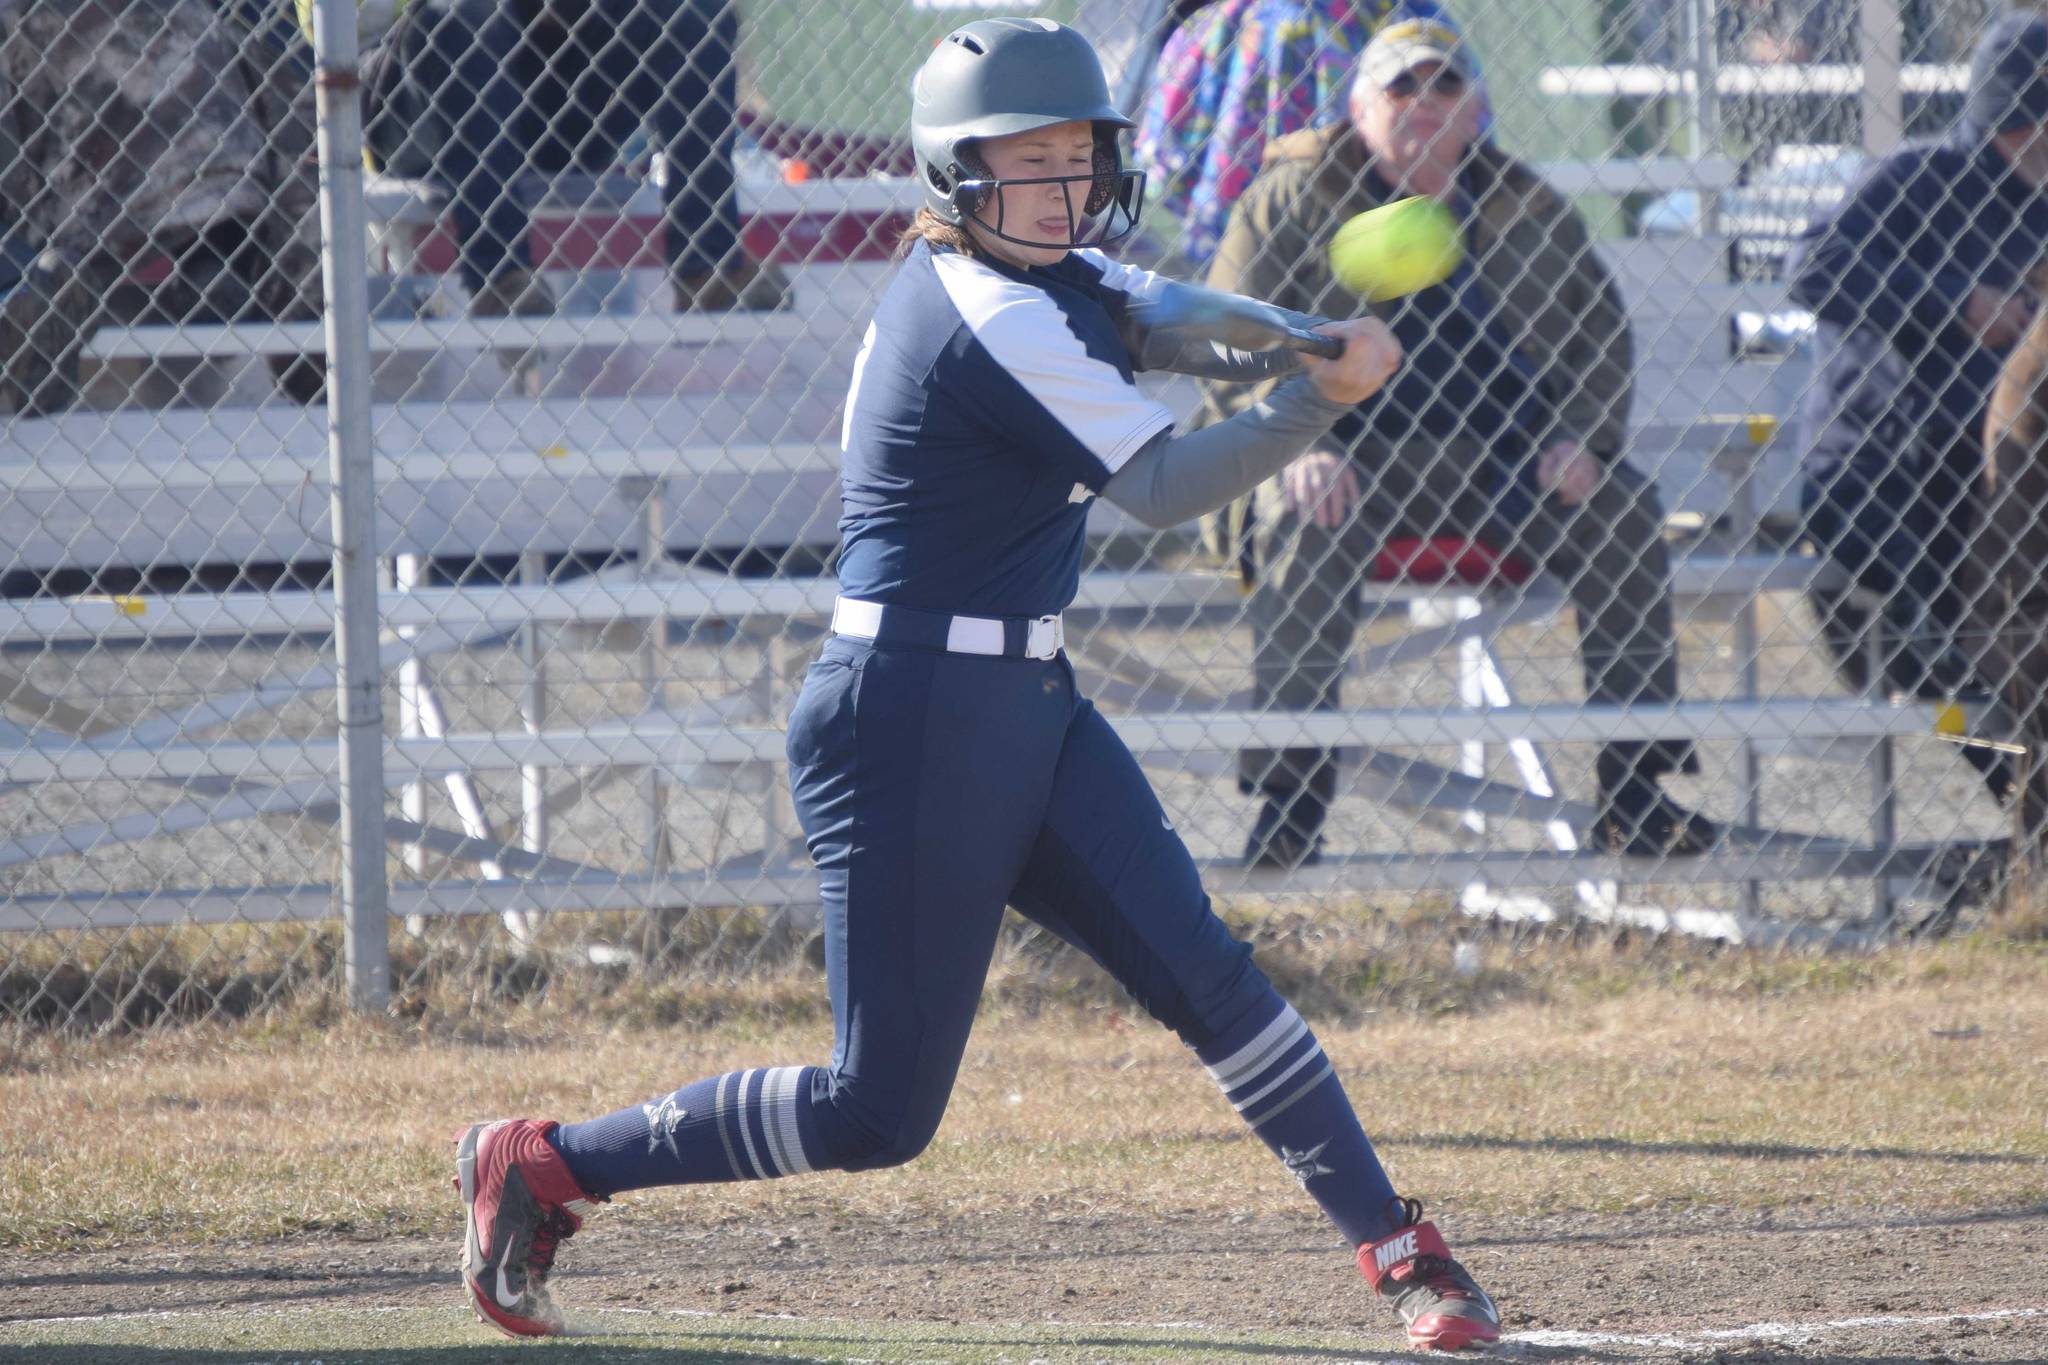 Soldotna's Brook Fischer collects a hit against Kenai Central on Thursday, May 13, 2021, in Kenai, Alaska. (Photo by Jeff Helminiak/Peninsula Clarion)